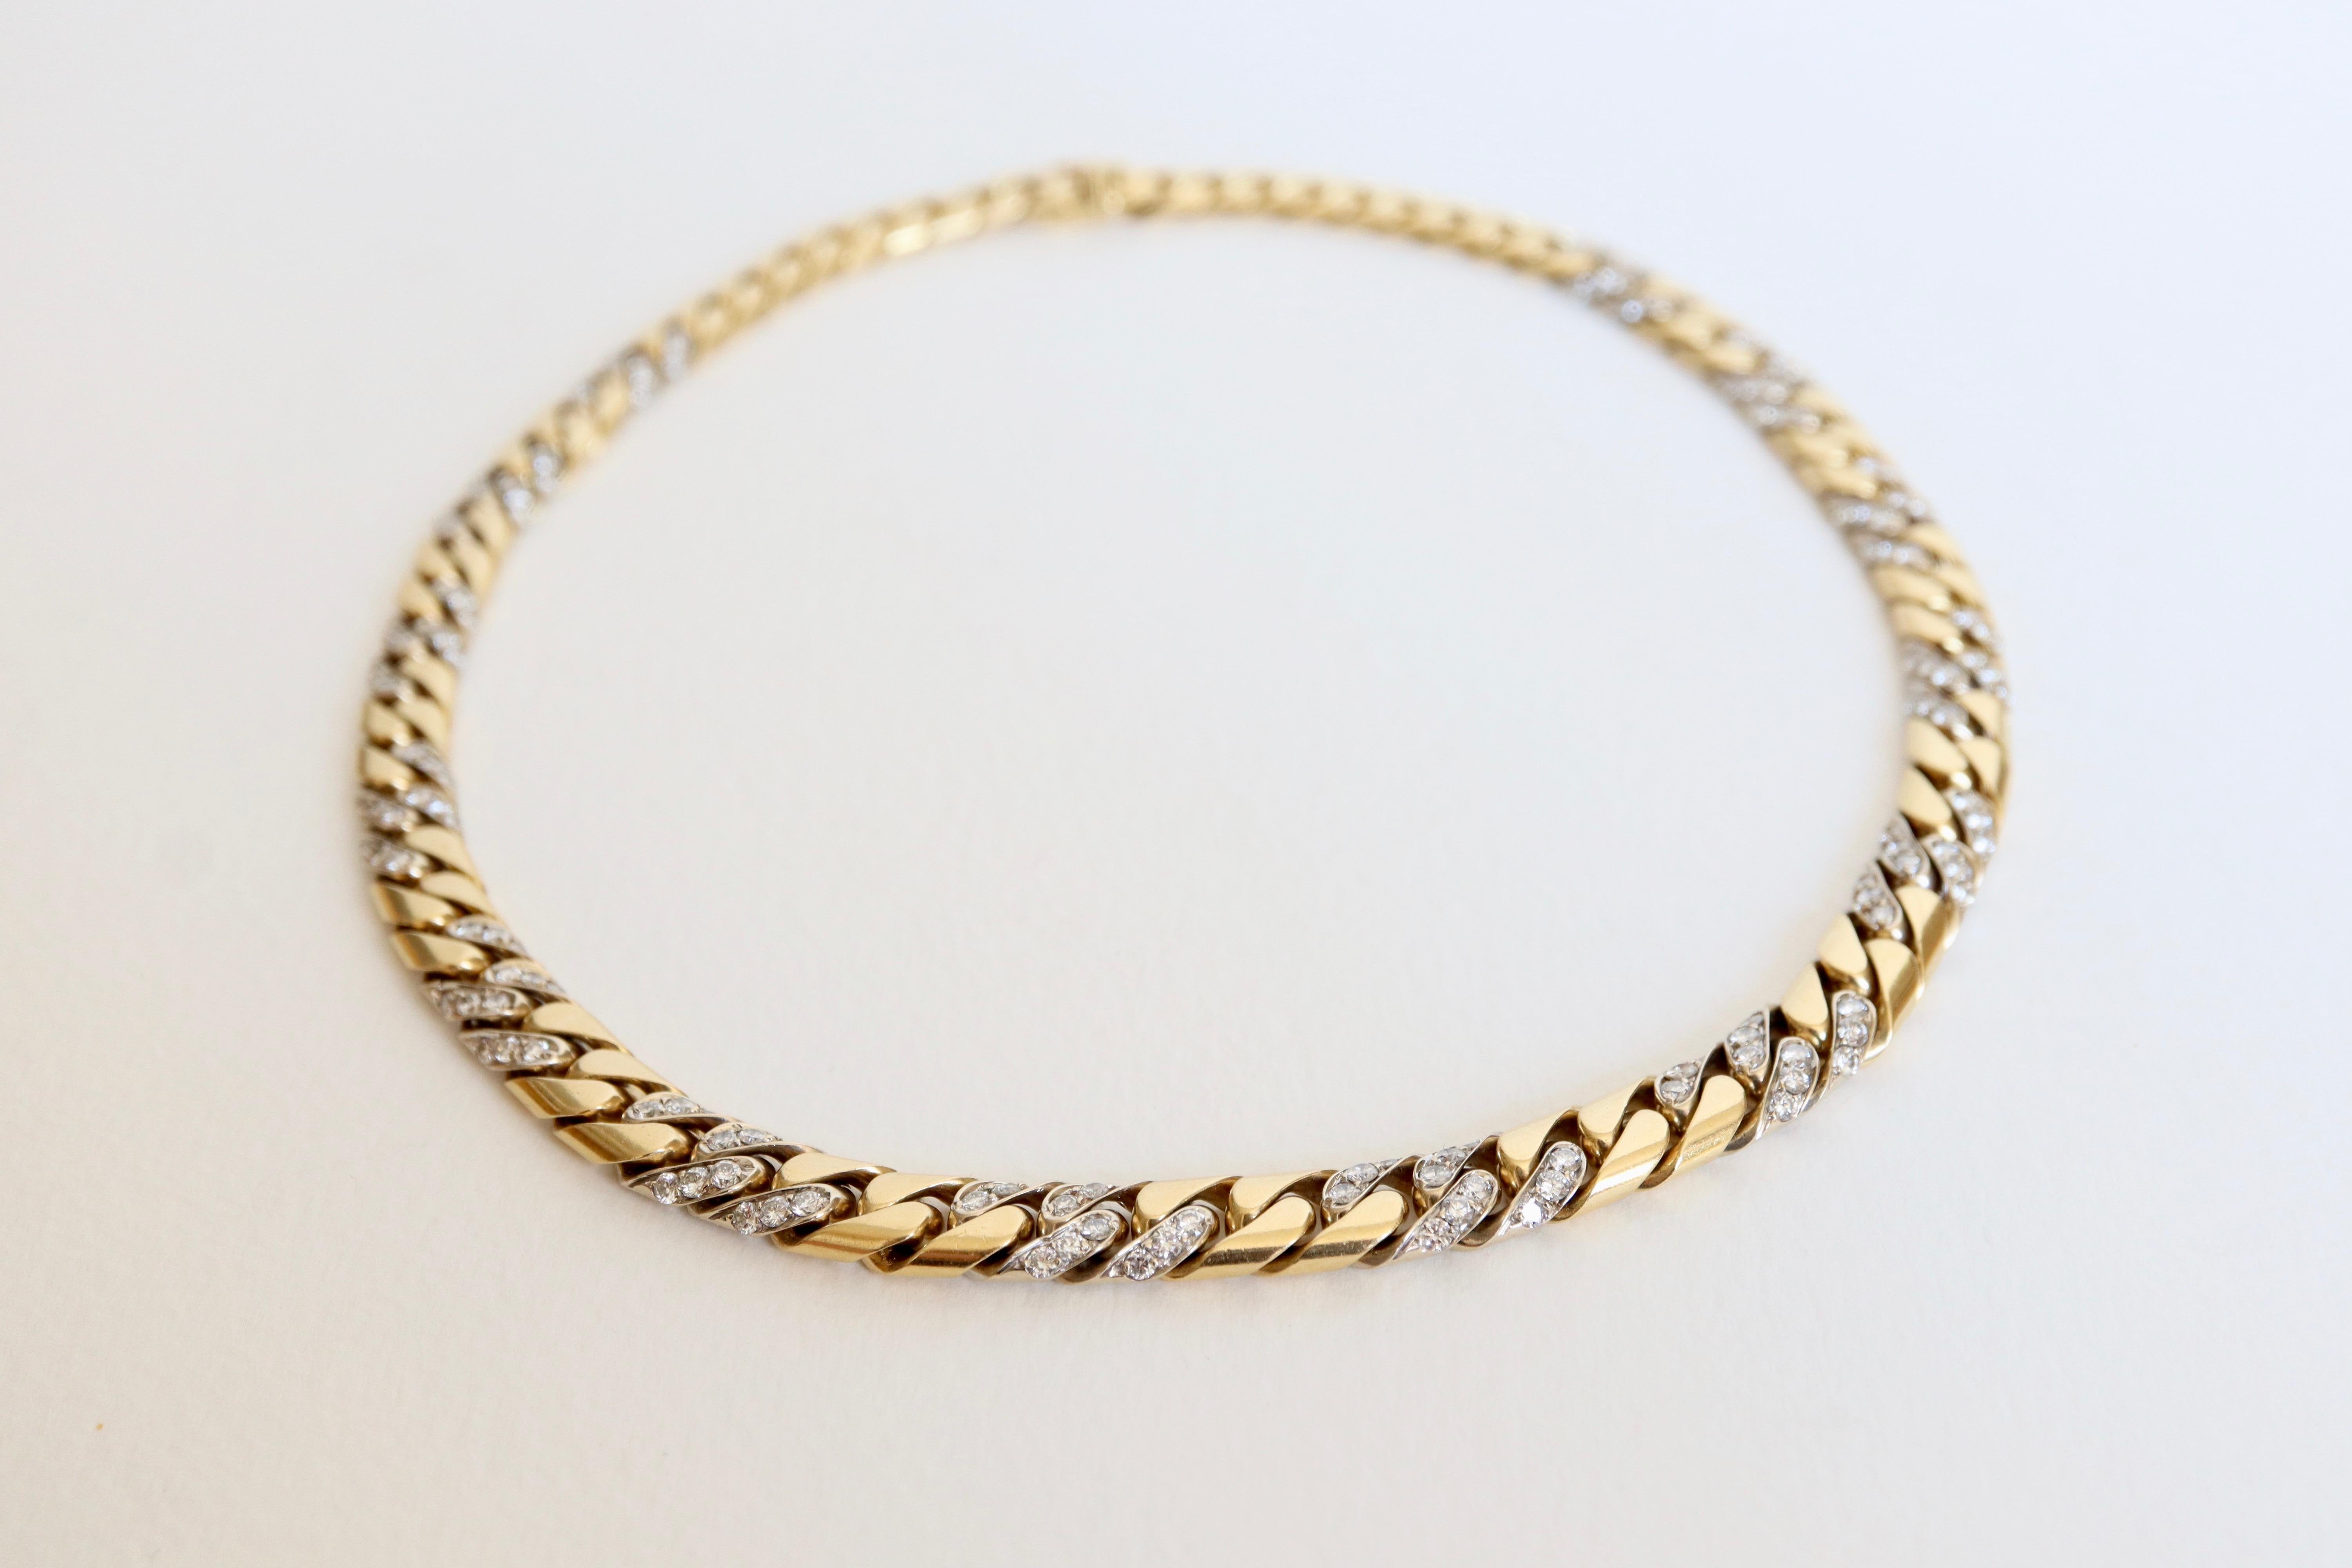 Fred Paris Link Gold Necklace with Diamonds Gold and White 18 Carats Gold 3